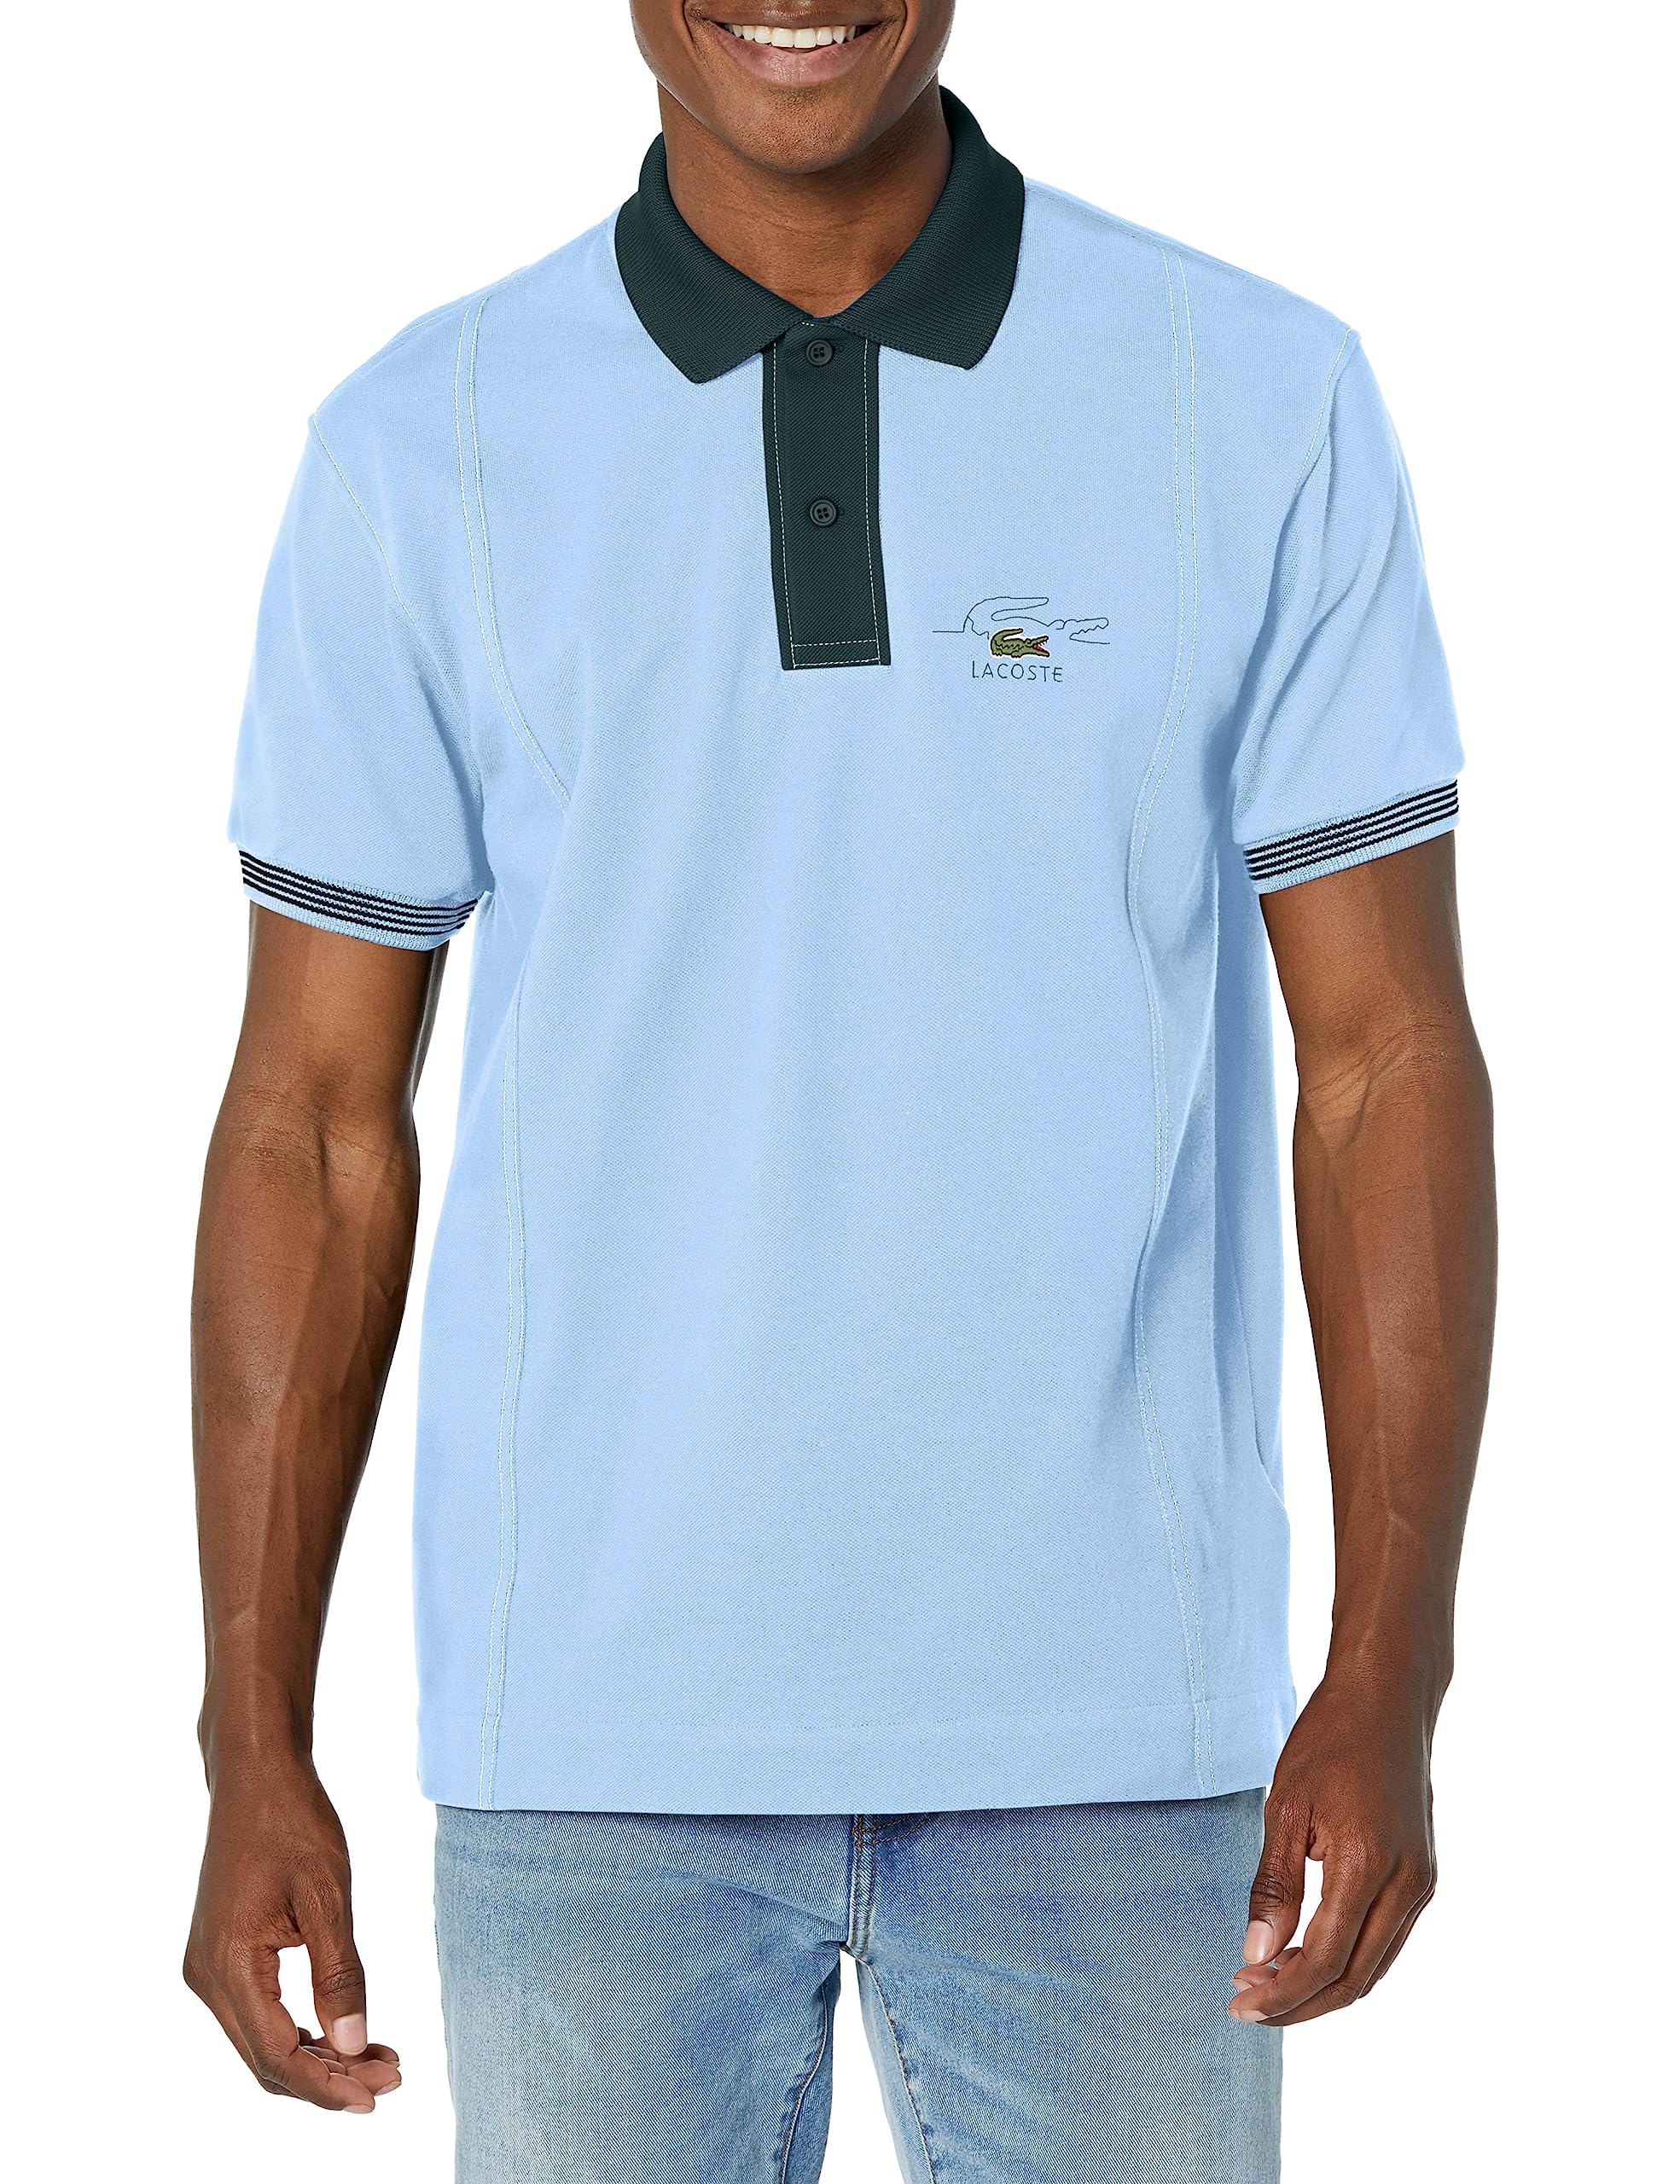 Lacoste Contemporary Collection's Men's Short Sleeve Classic Fit Color Blocked Polo Shirt